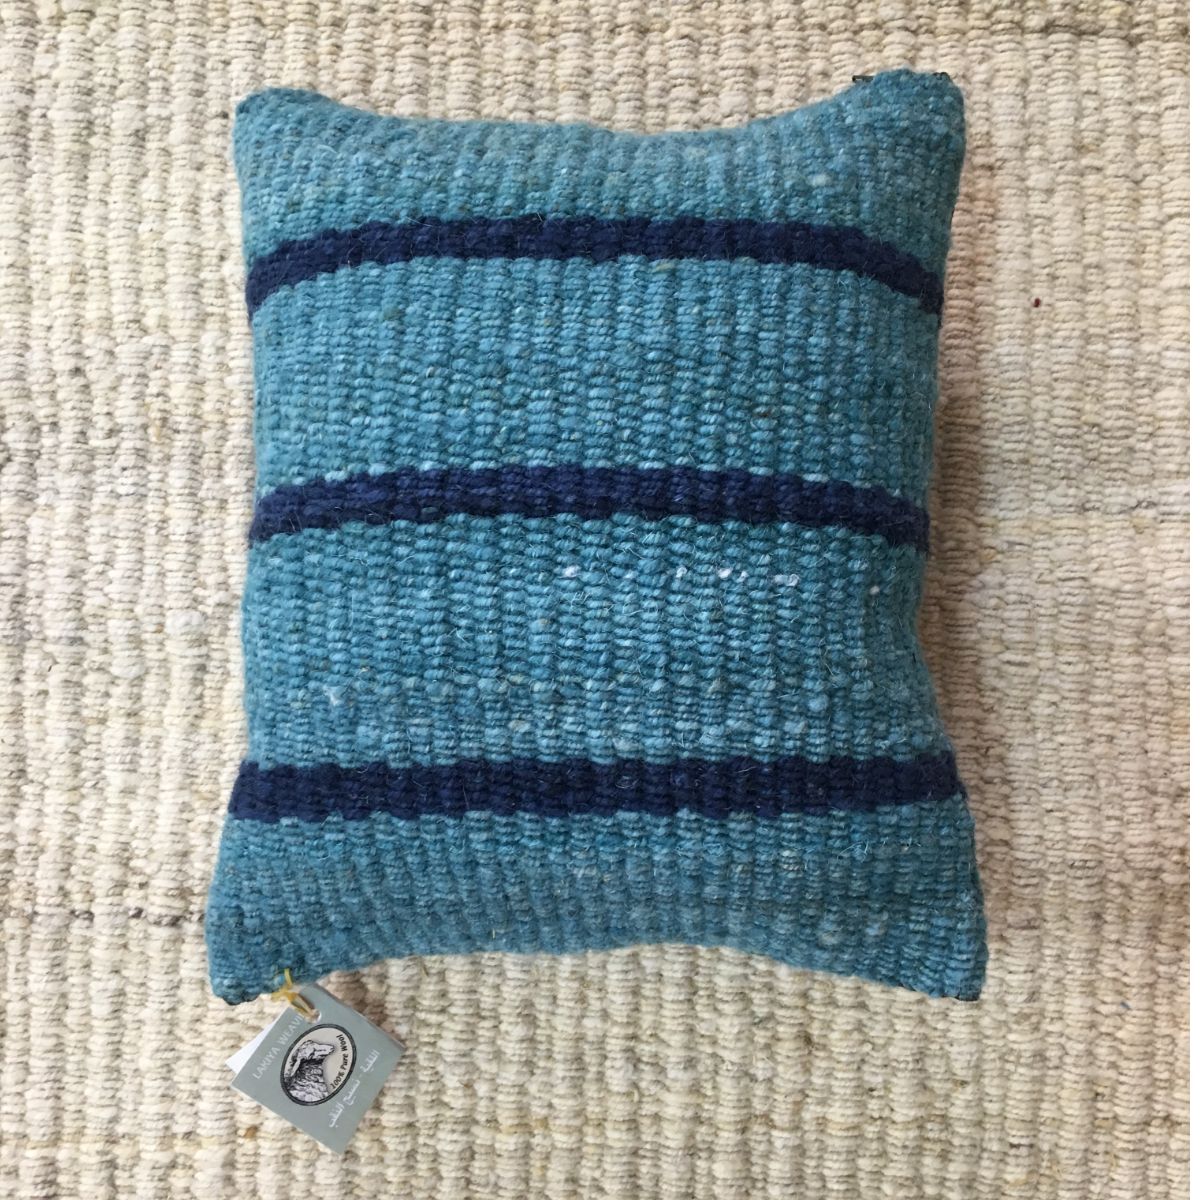 Turquoise pillow